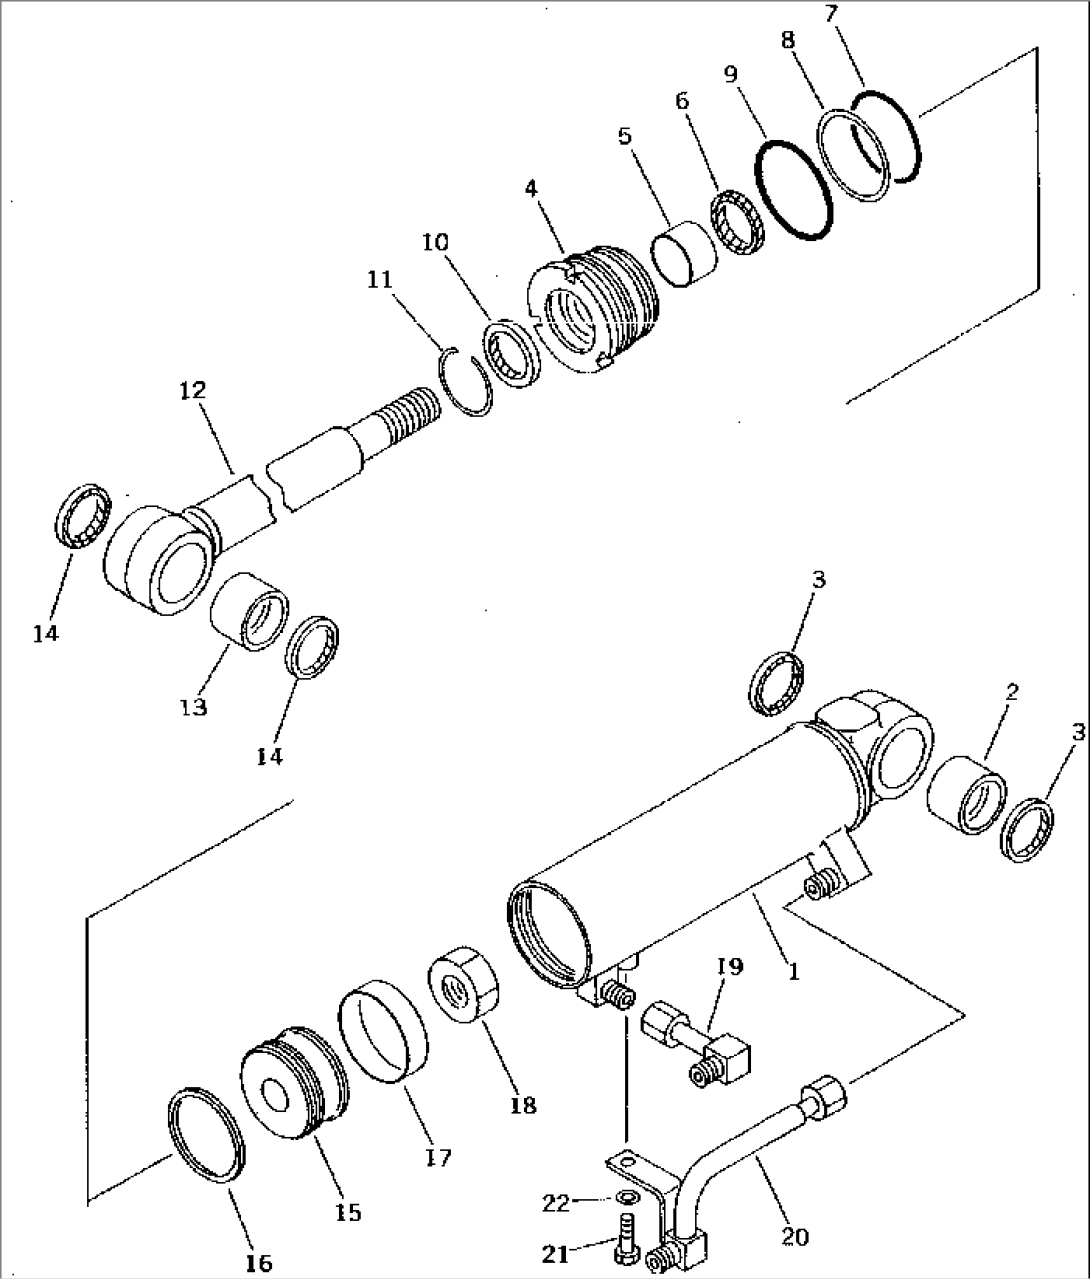 3-POINT HITCH CYLINDER (INNER PARTS)